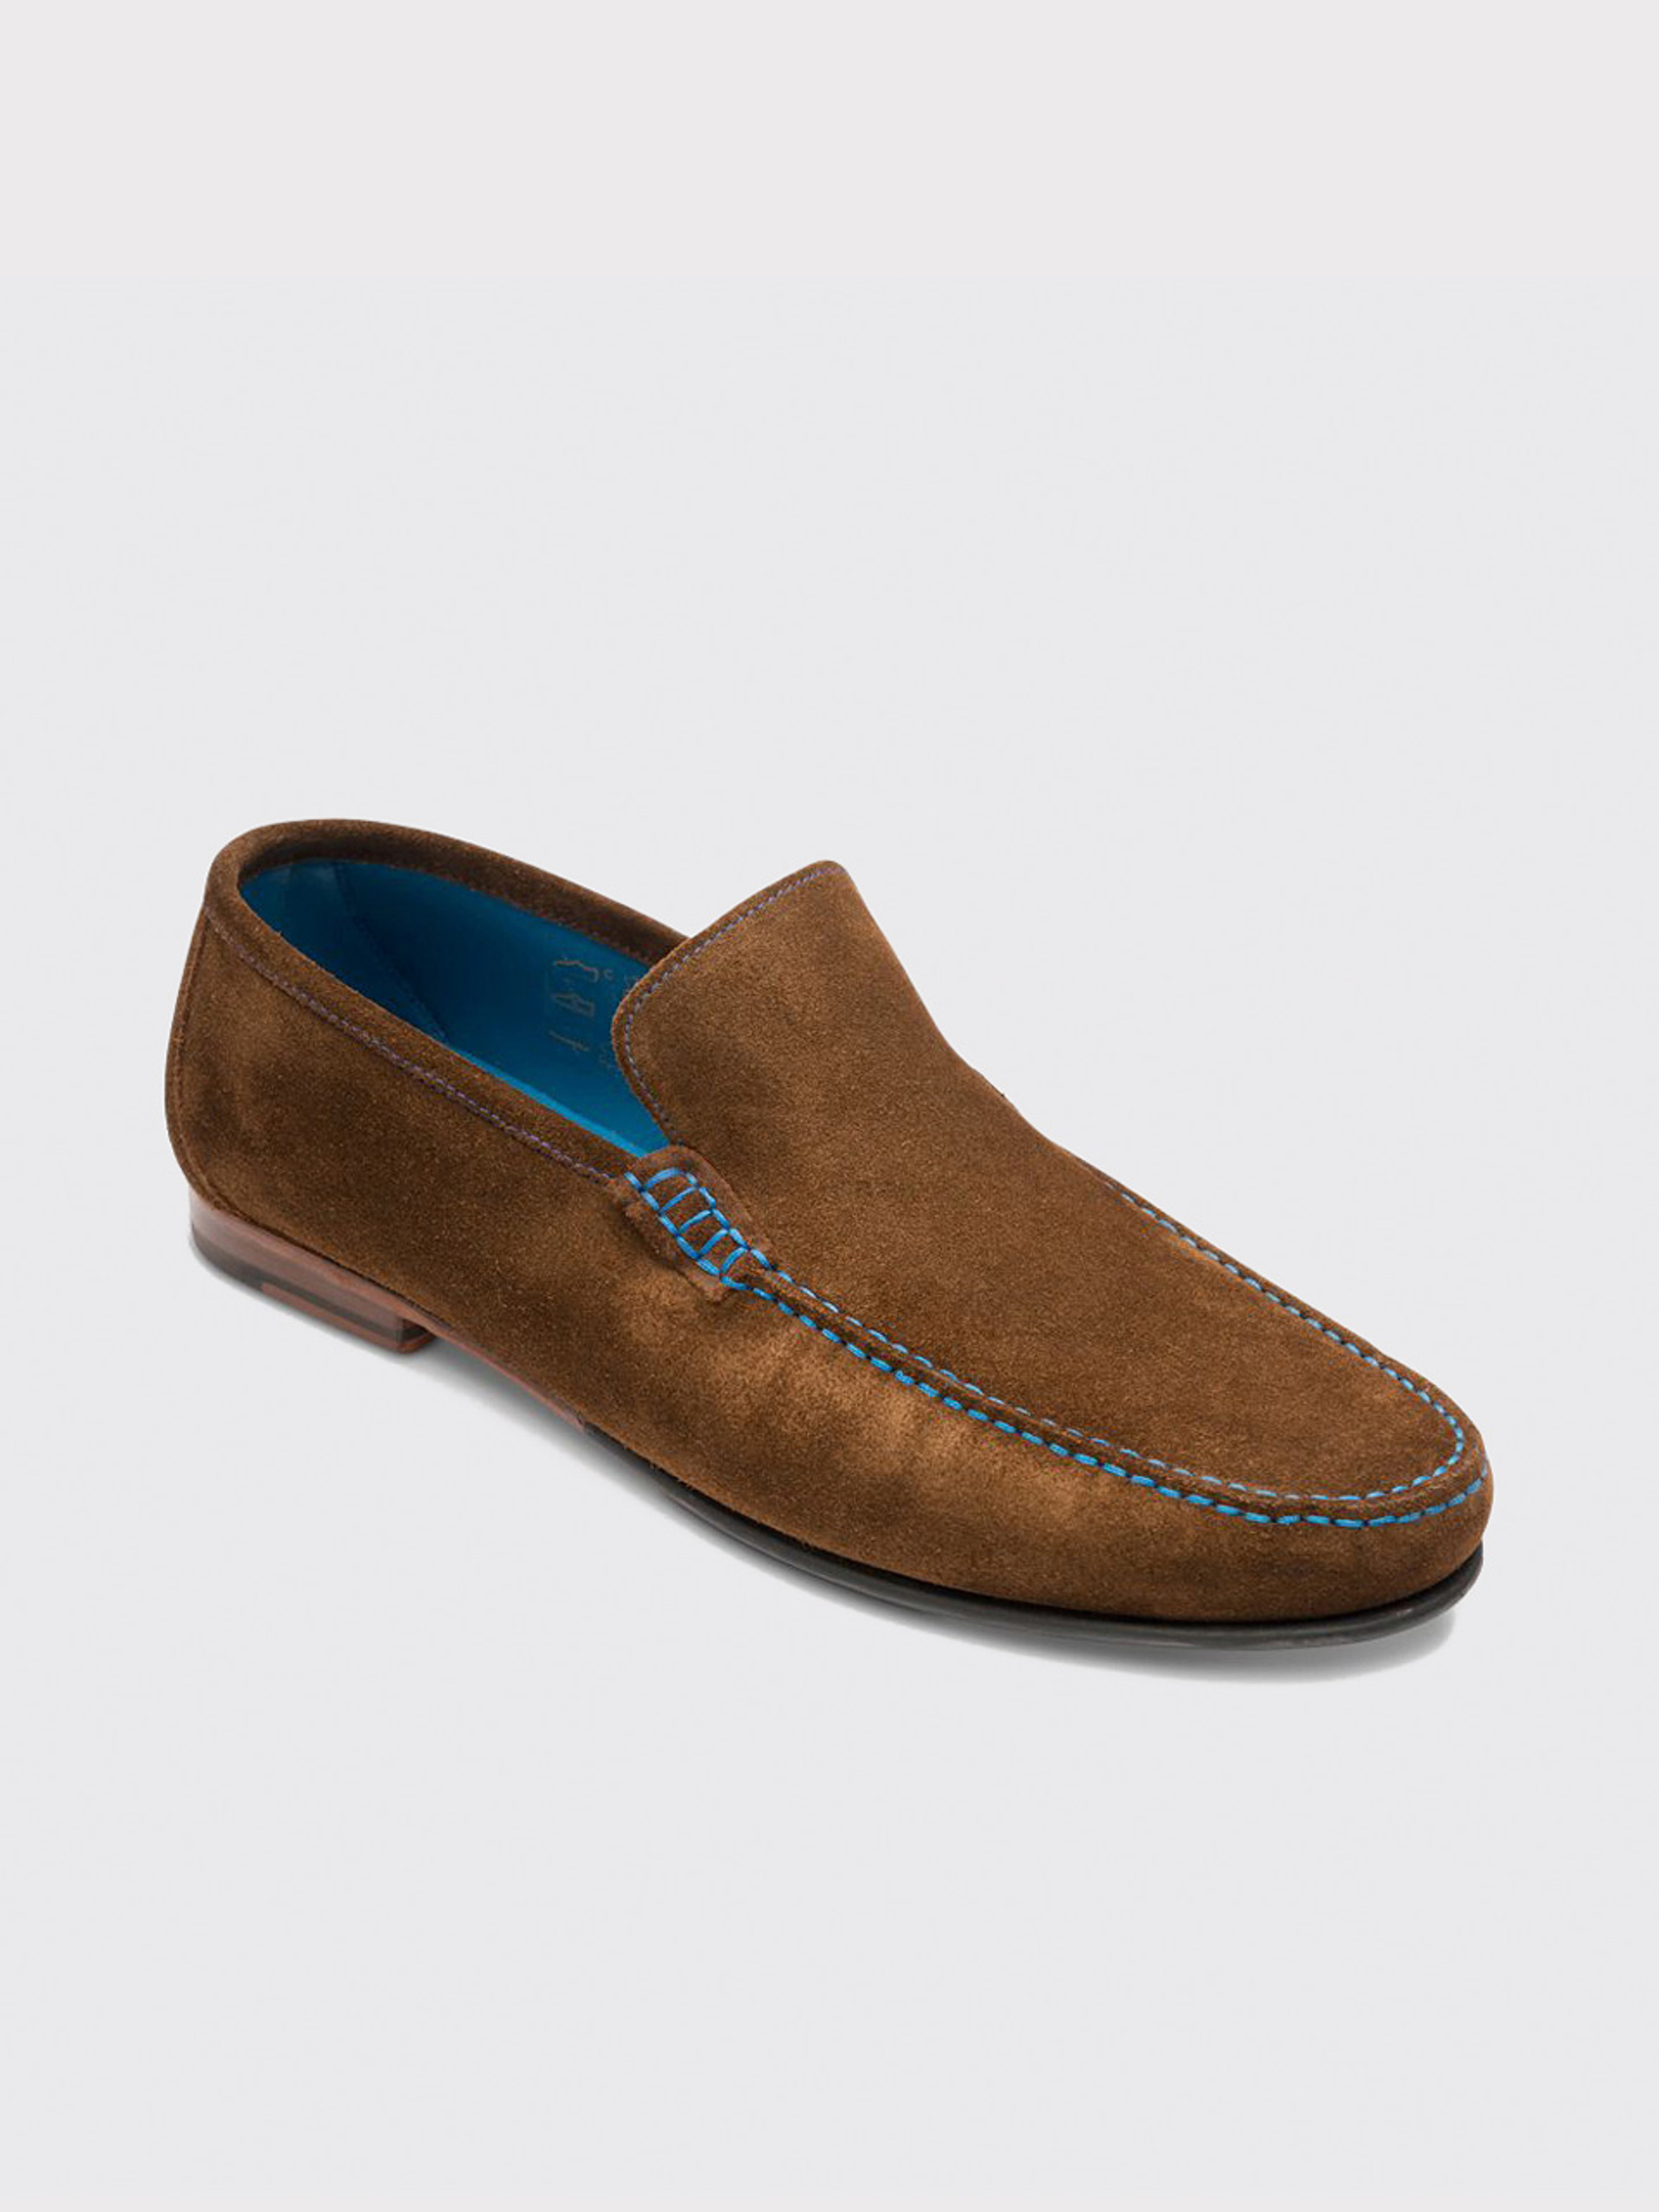 Brown Loake Nicholson Suede Loafer | Peter Christian